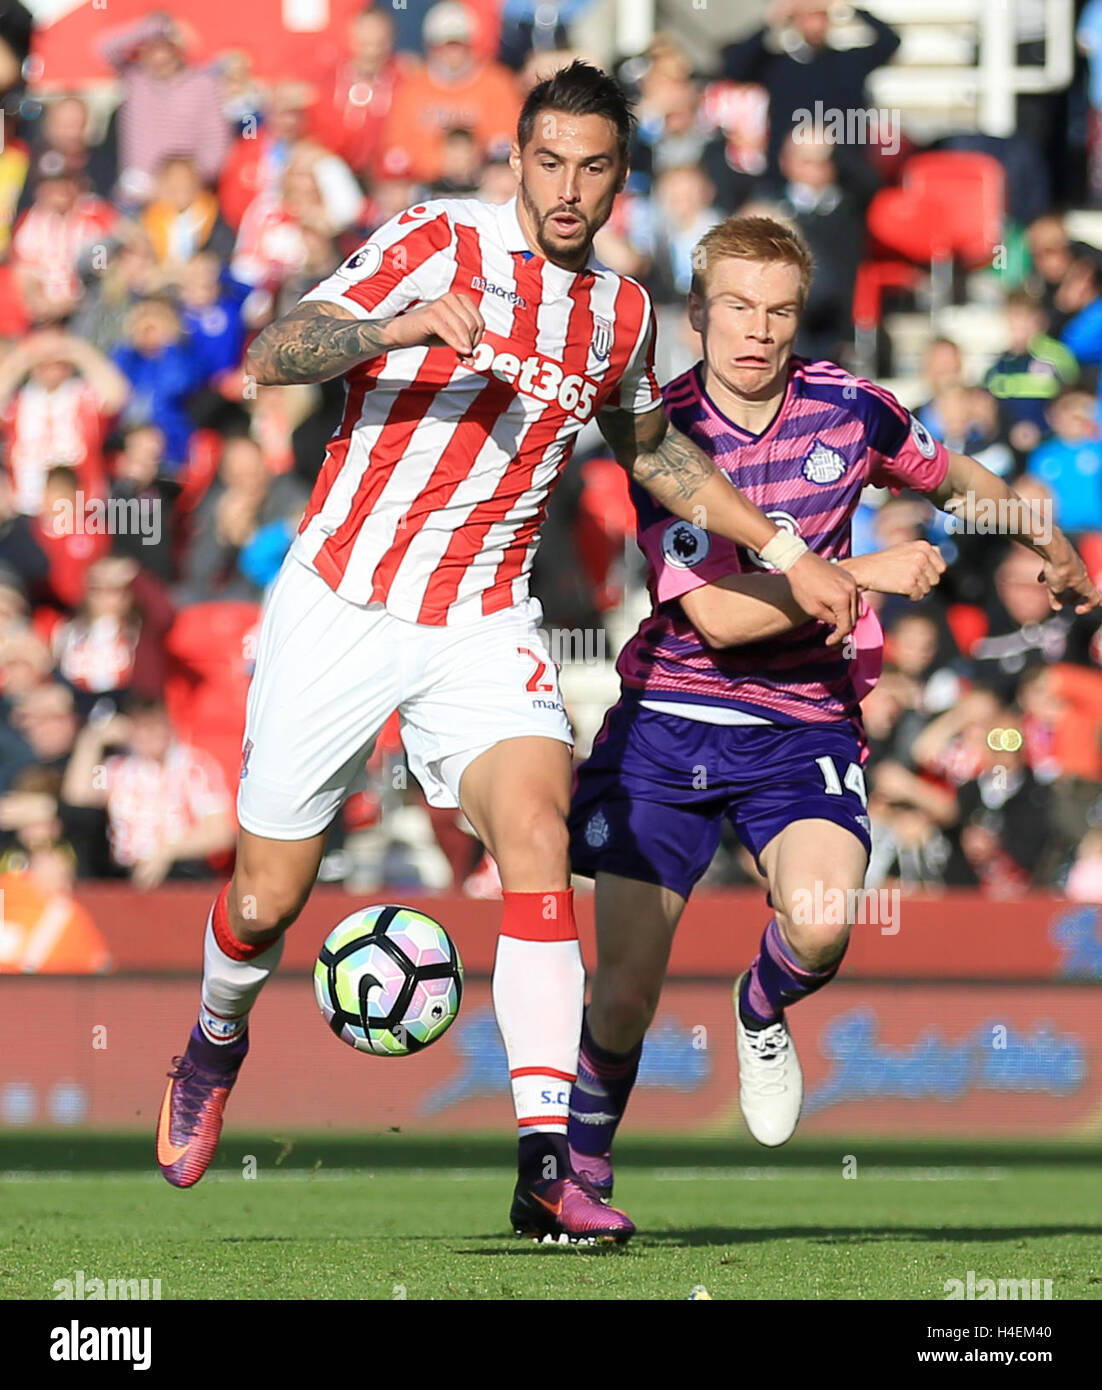 Stoke City's Geoff Cameron (left) and Sunderland's Ducan Watmore battle for the ball during the Premier League match at the Bet365 Stadium, Stoke. PRESS ASSOCIATION Photo. Picture date: Saturday October 15, 2016. See PA story SOCCER Stoke. Photo credit should read: Nigel French/PA Wire. RESTRICTIONS: EDITORIAL USE ONLY No use with unauthorised audio, video, data, fixture lists, club/league logos or 'live' services. Online in-match use limited to 75 images, no video emulation. No use in betting, games or single club/league/player publications. Stock Photo